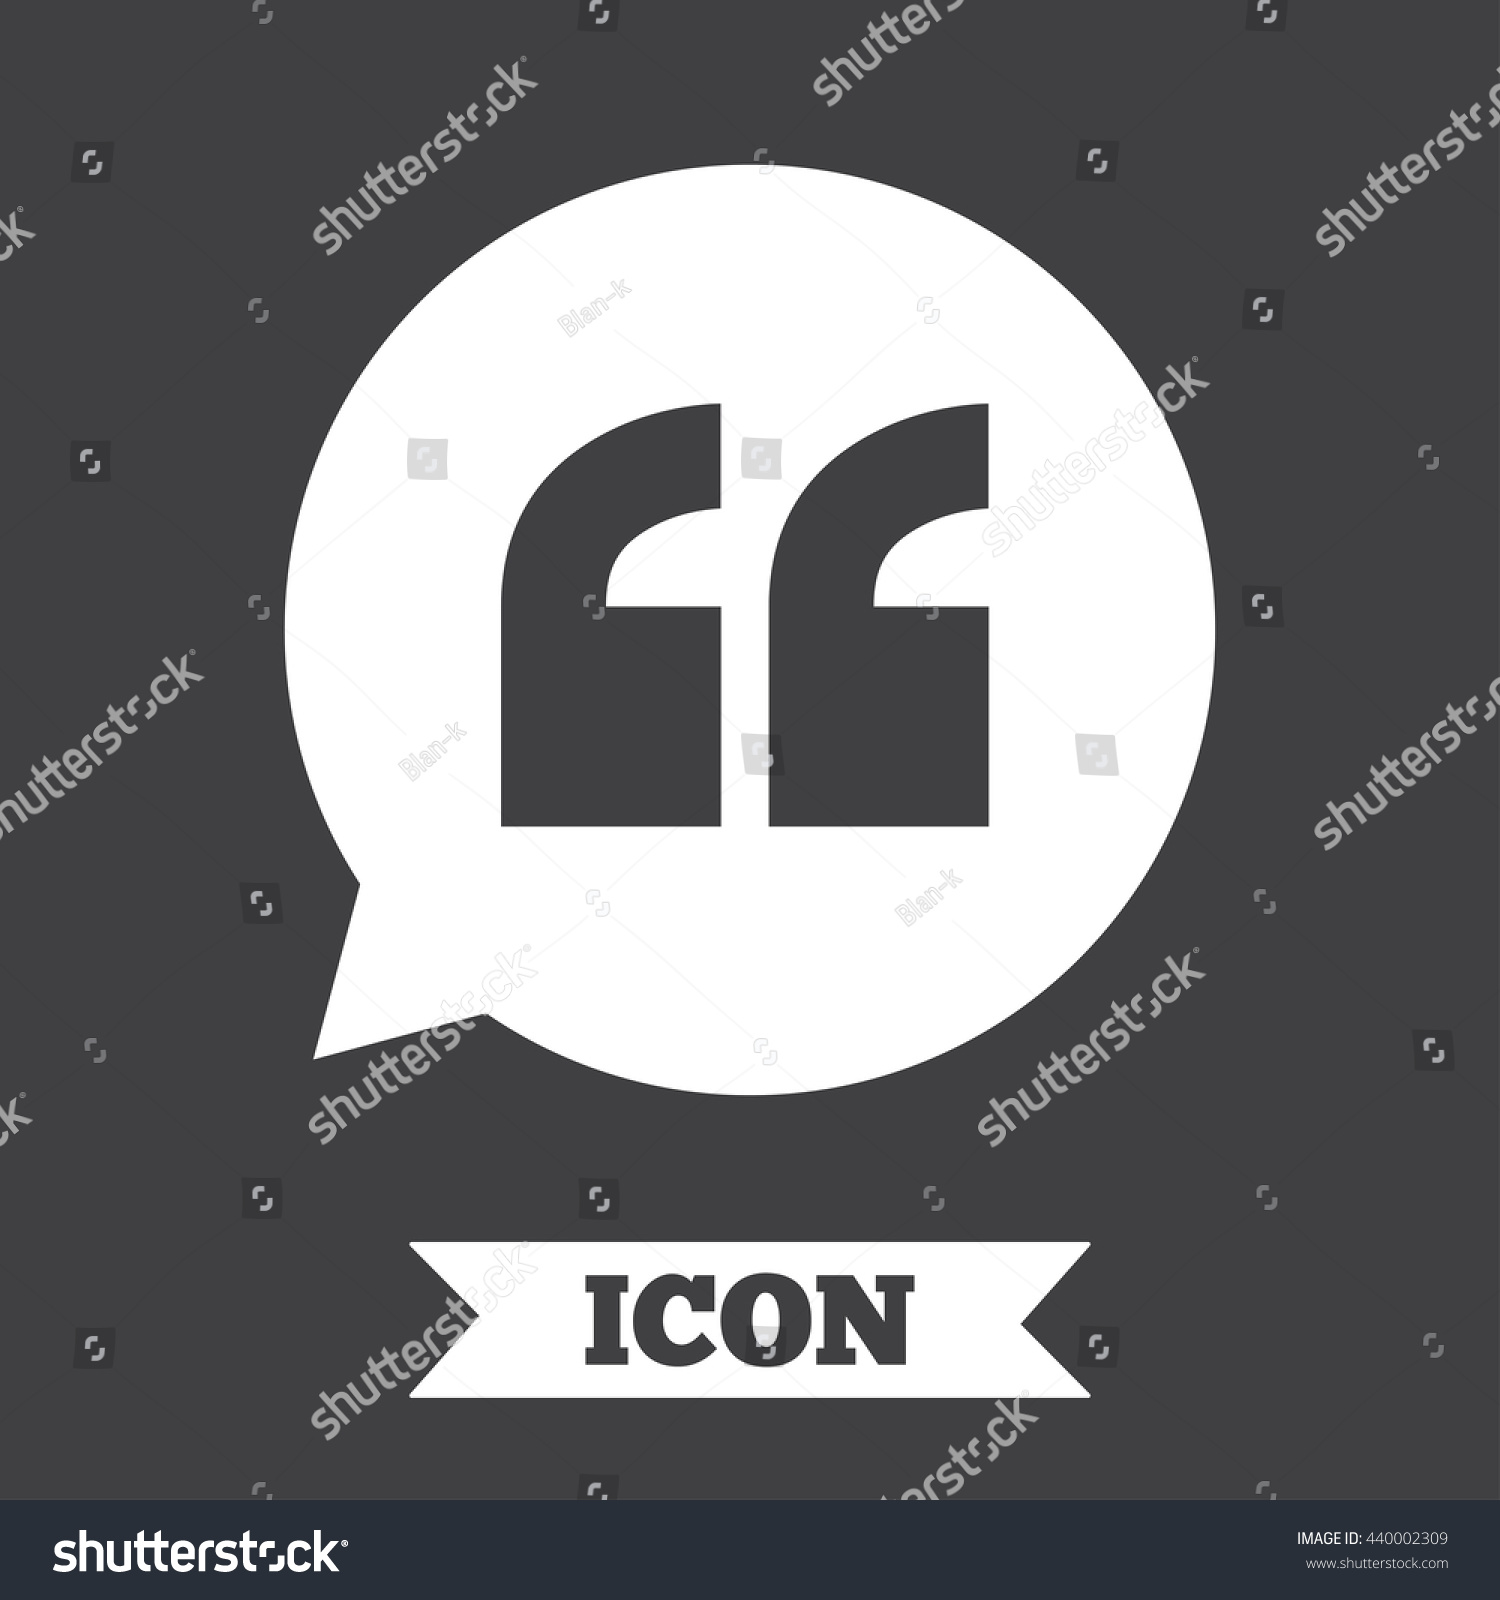 Download Quote Sign Icon Quotation Mark Speech Stock Vector ...